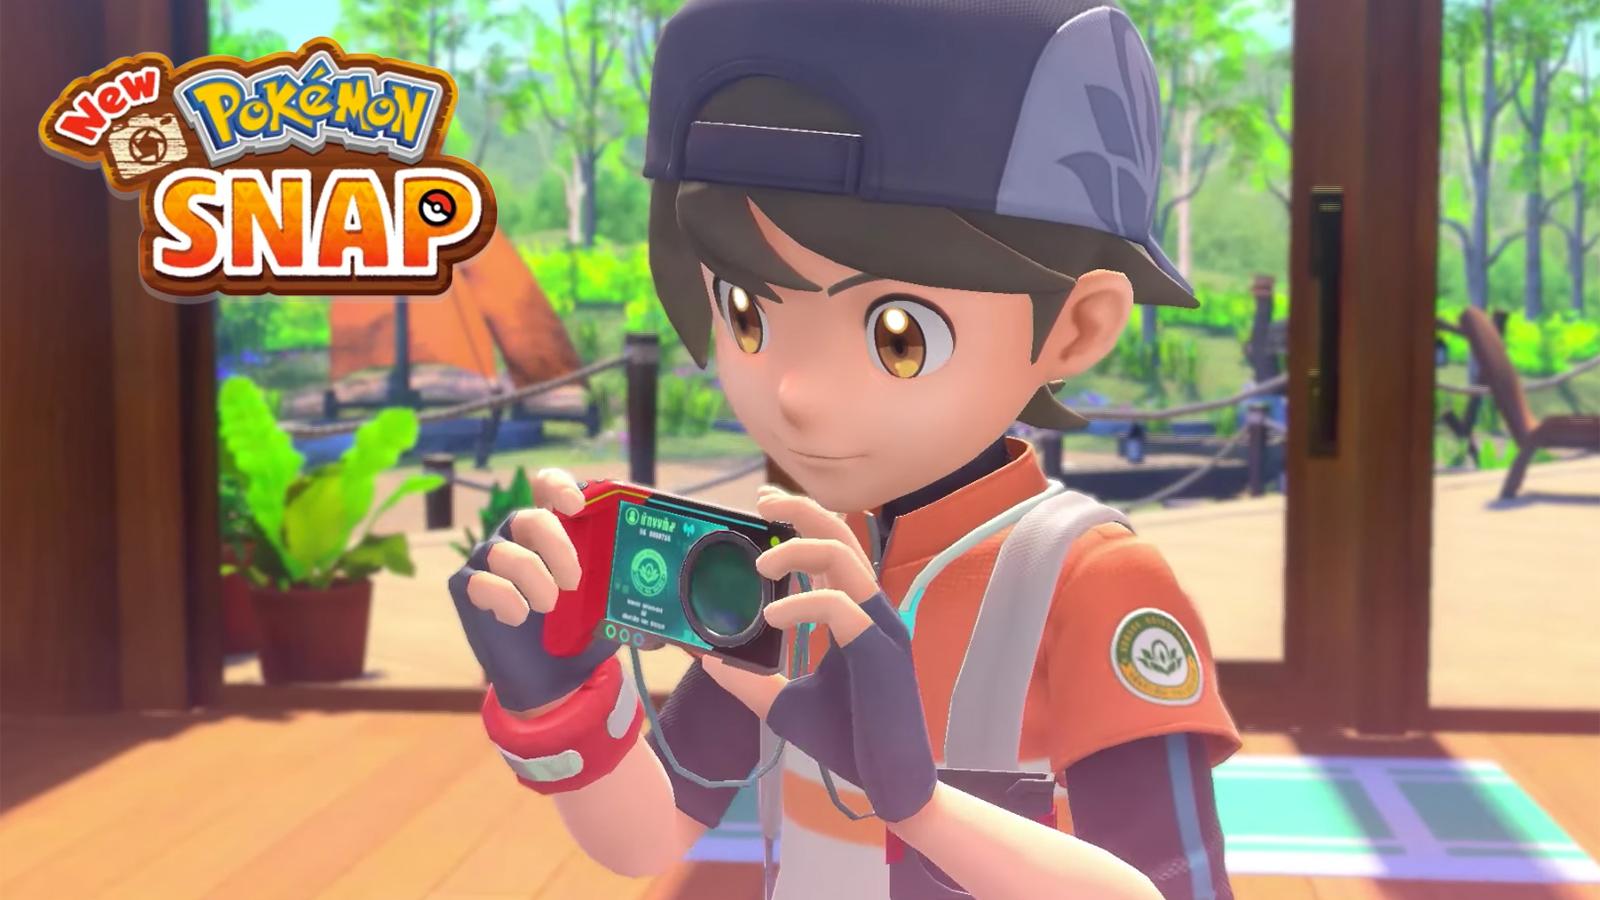 New Pokemon Snap: - Release trailer, preorders story, details & Dexerto date, gameplay